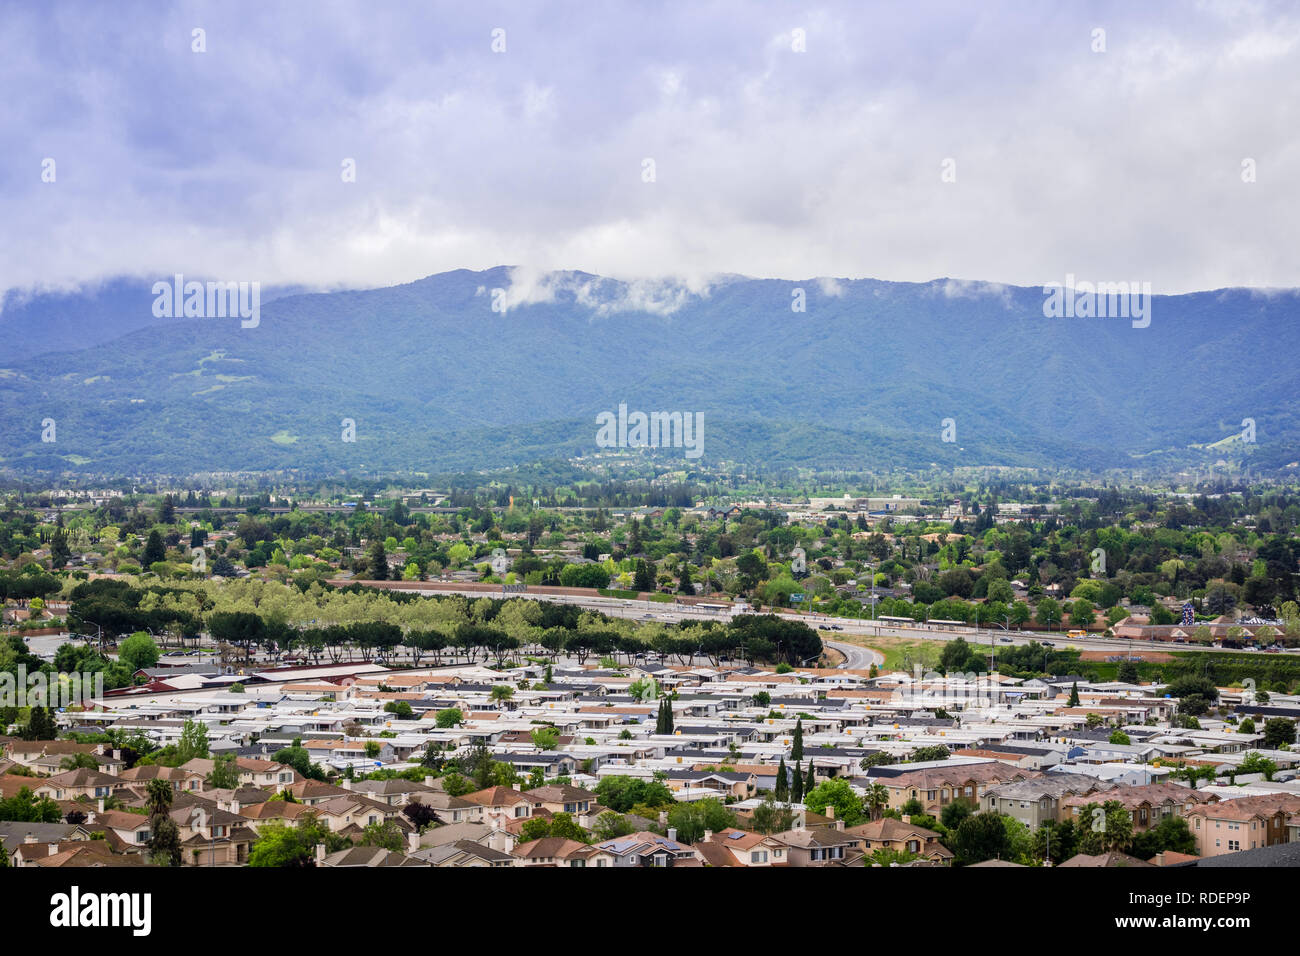 Aerial view of residential neighborhood on a cloudy day, San Jose, California Stock Photo